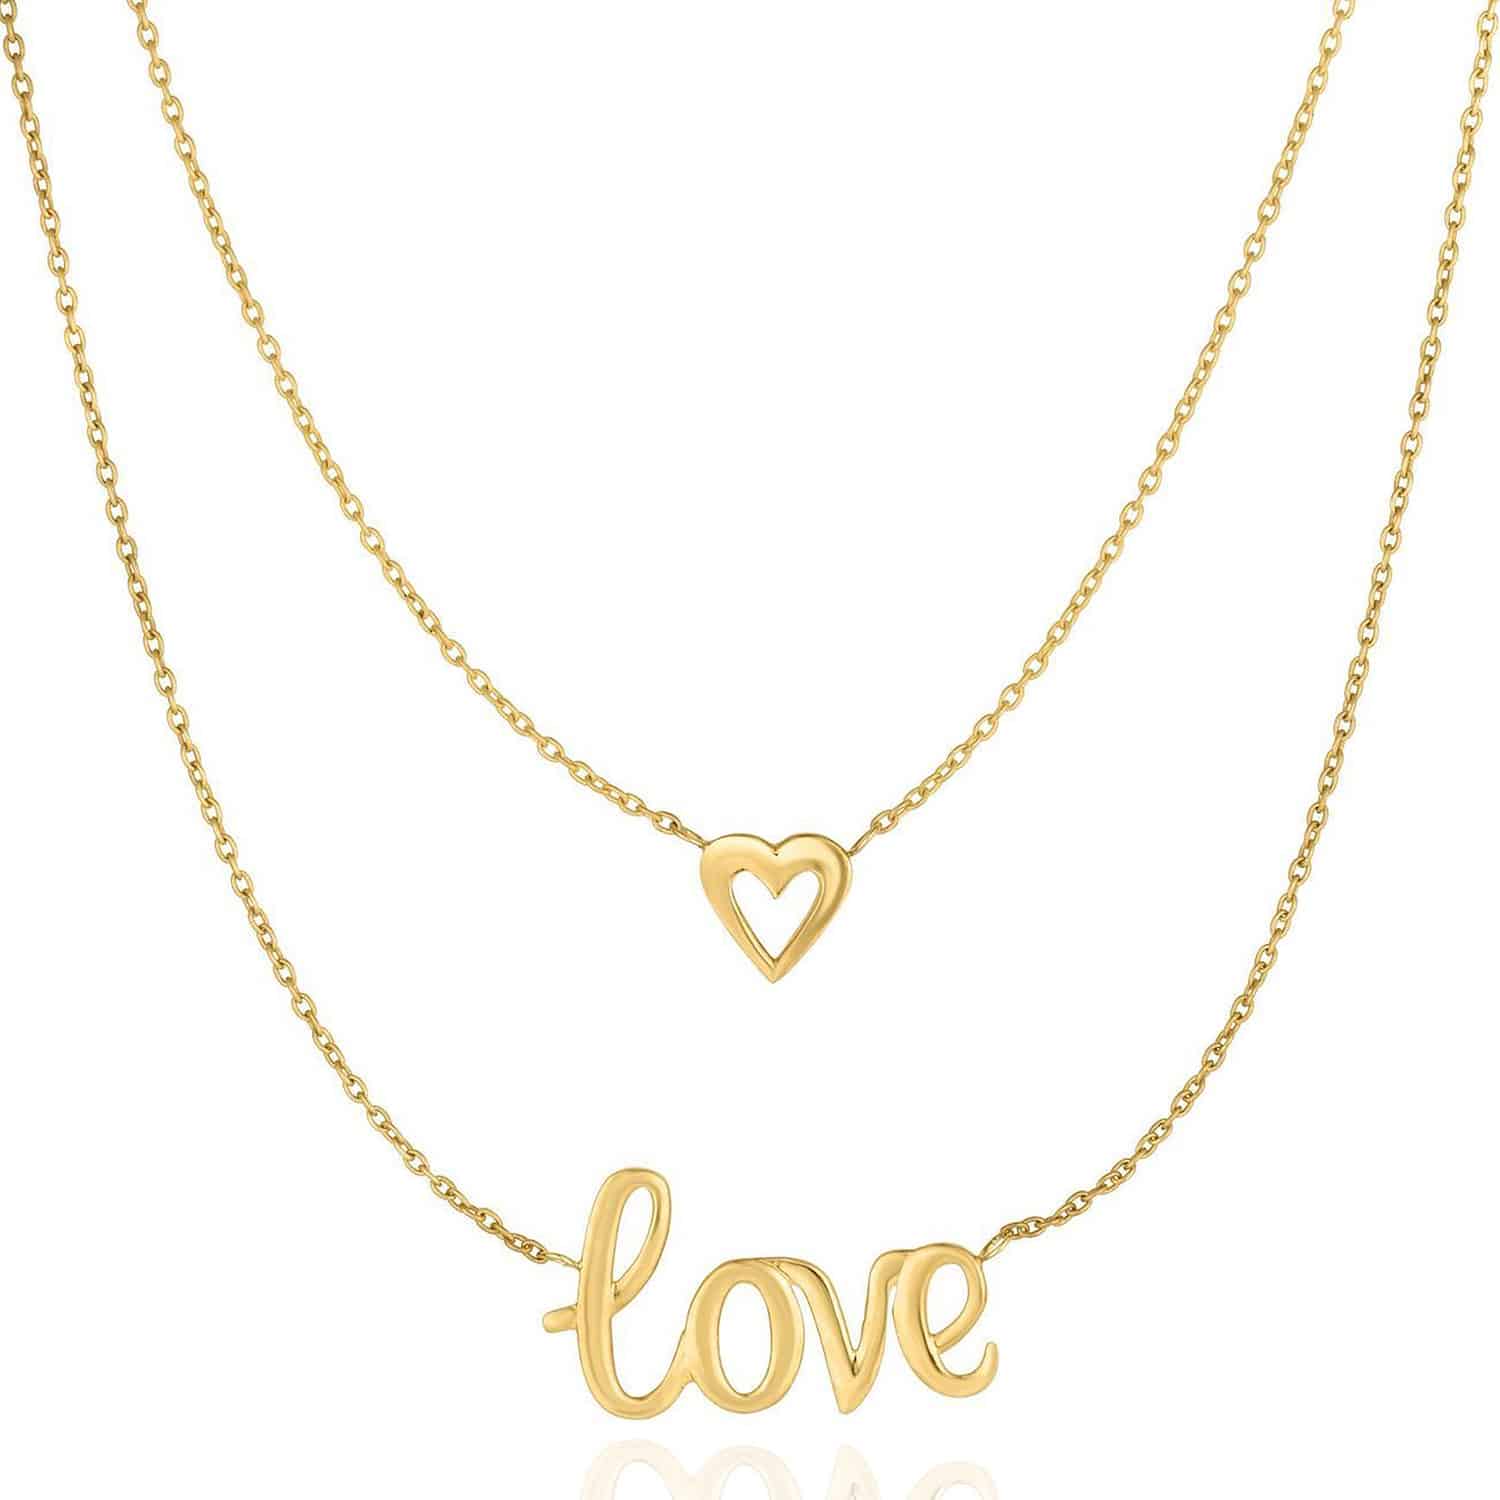 10K Yellow Gold Multi Layered Cable Chain Heart "Love" Pendant Necklace 17"